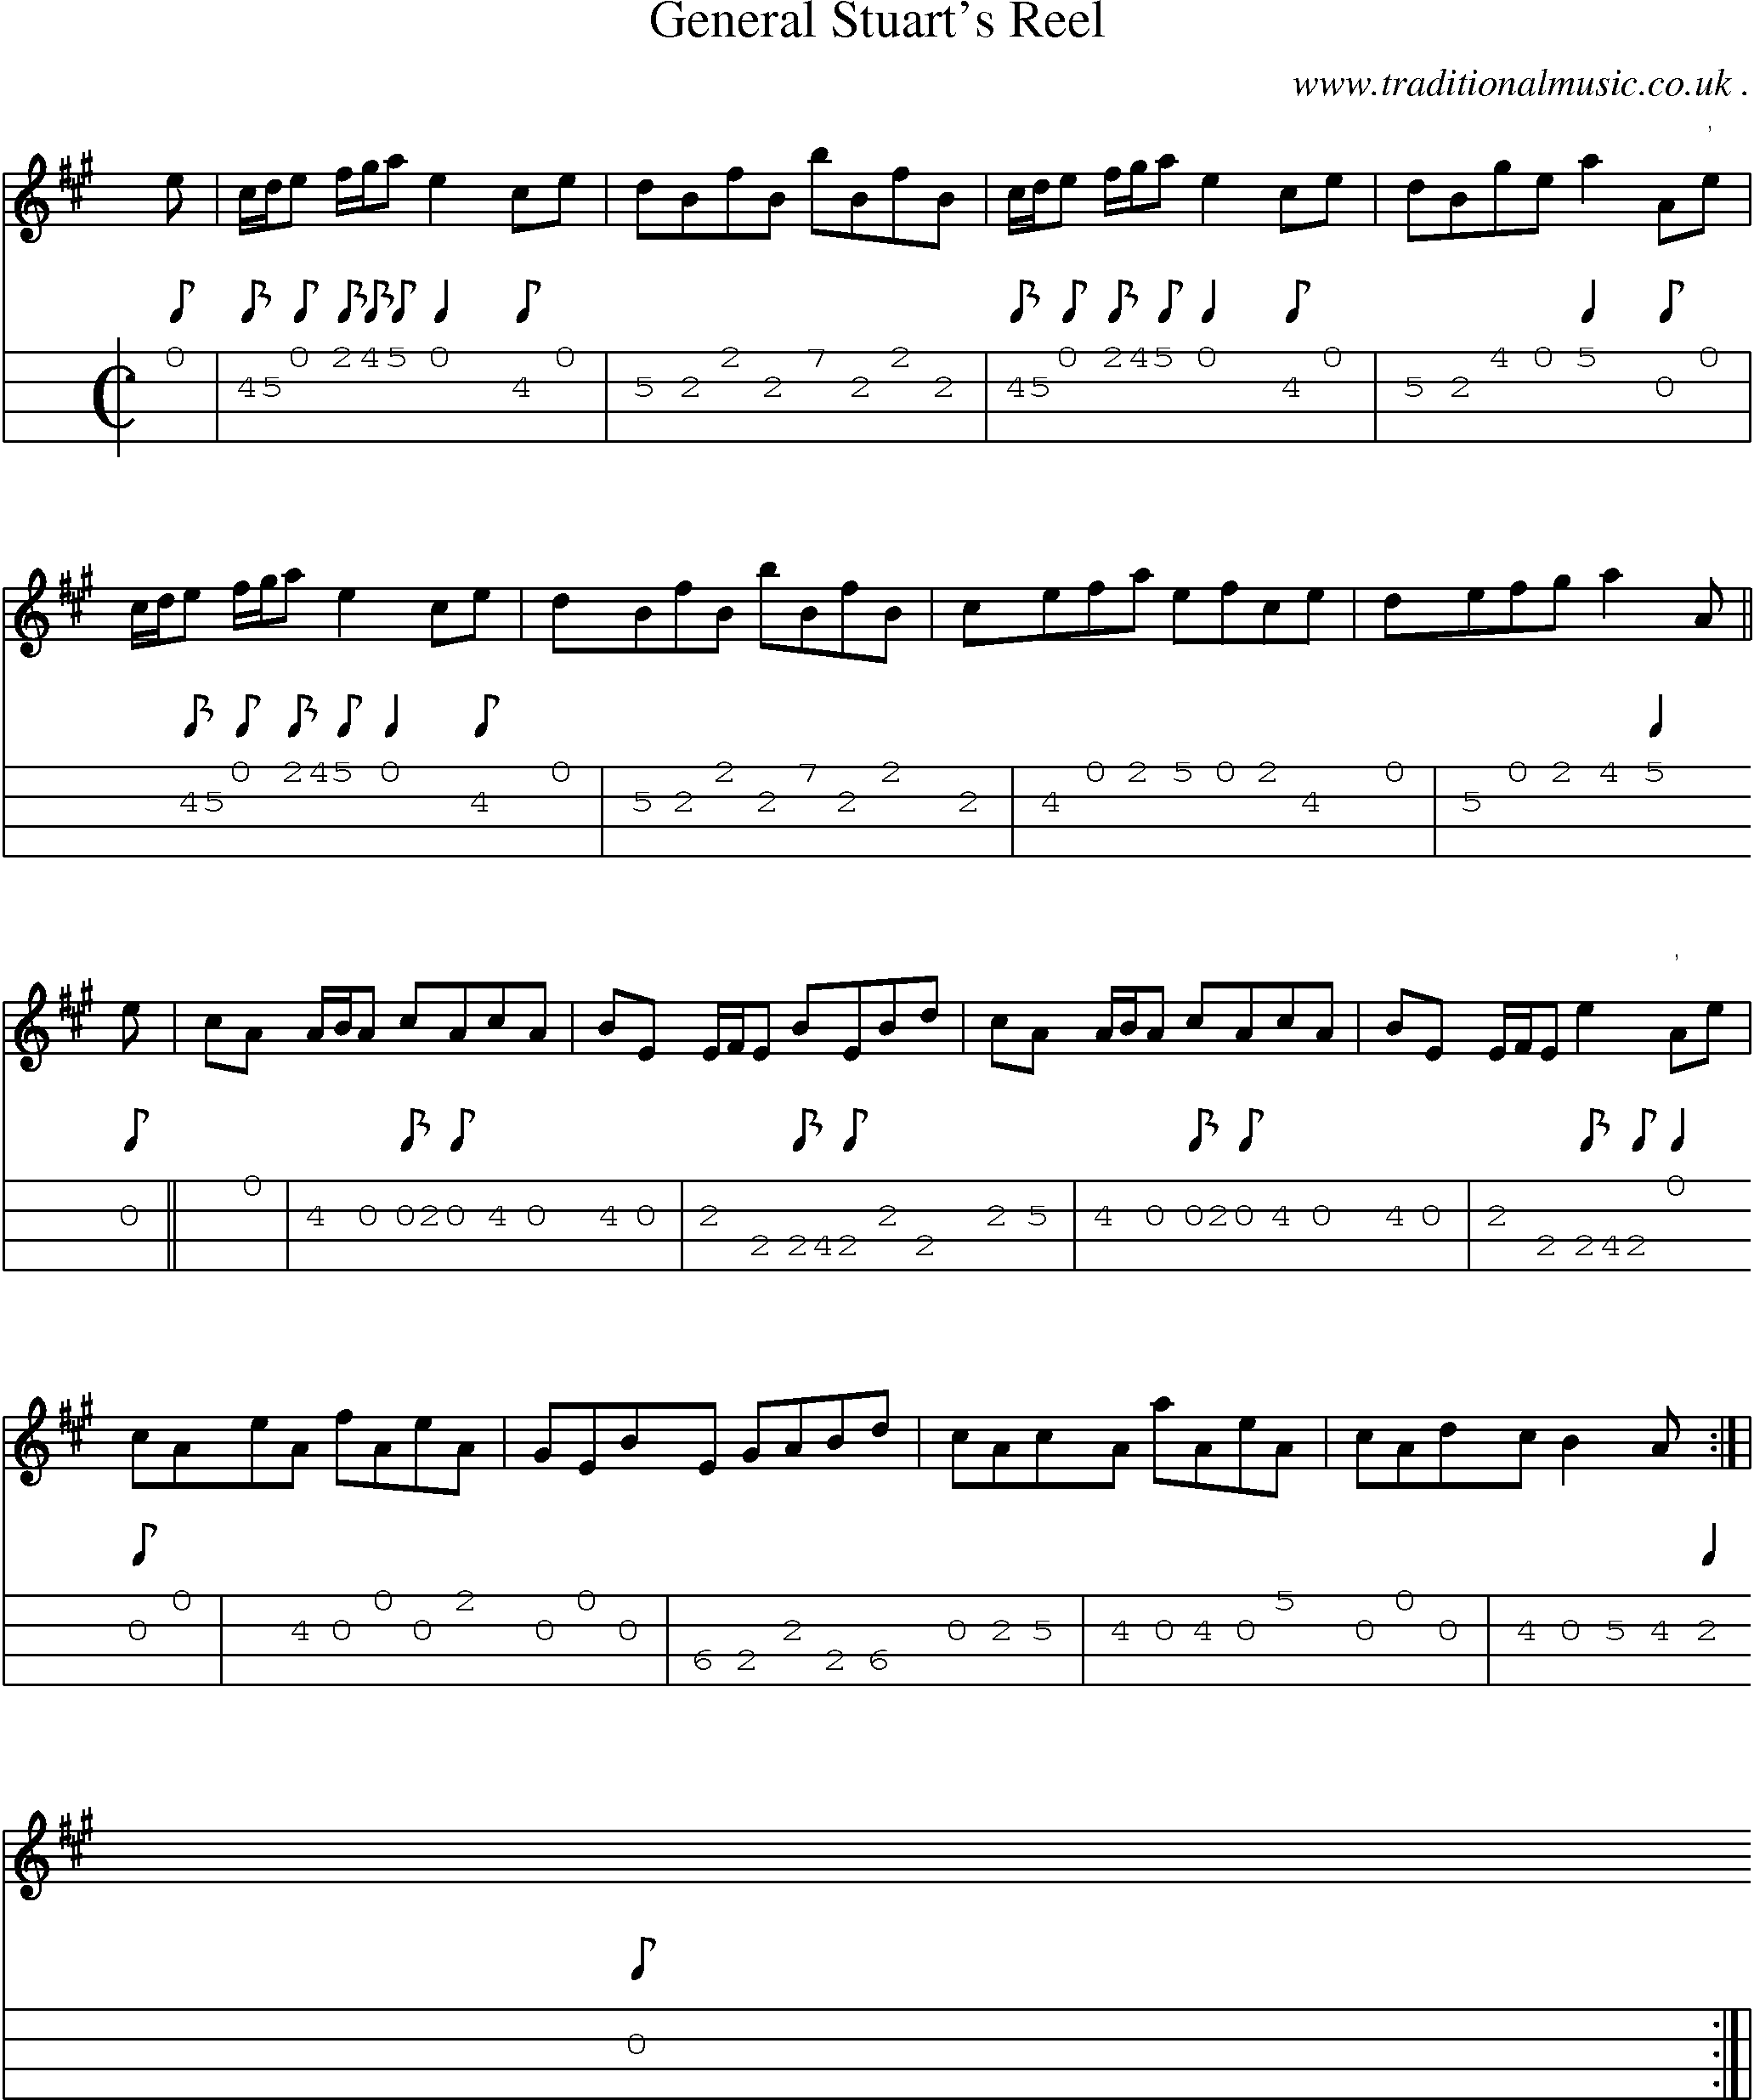 Sheet-music  score, Chords and Mandolin Tabs for General Stuarts Reel